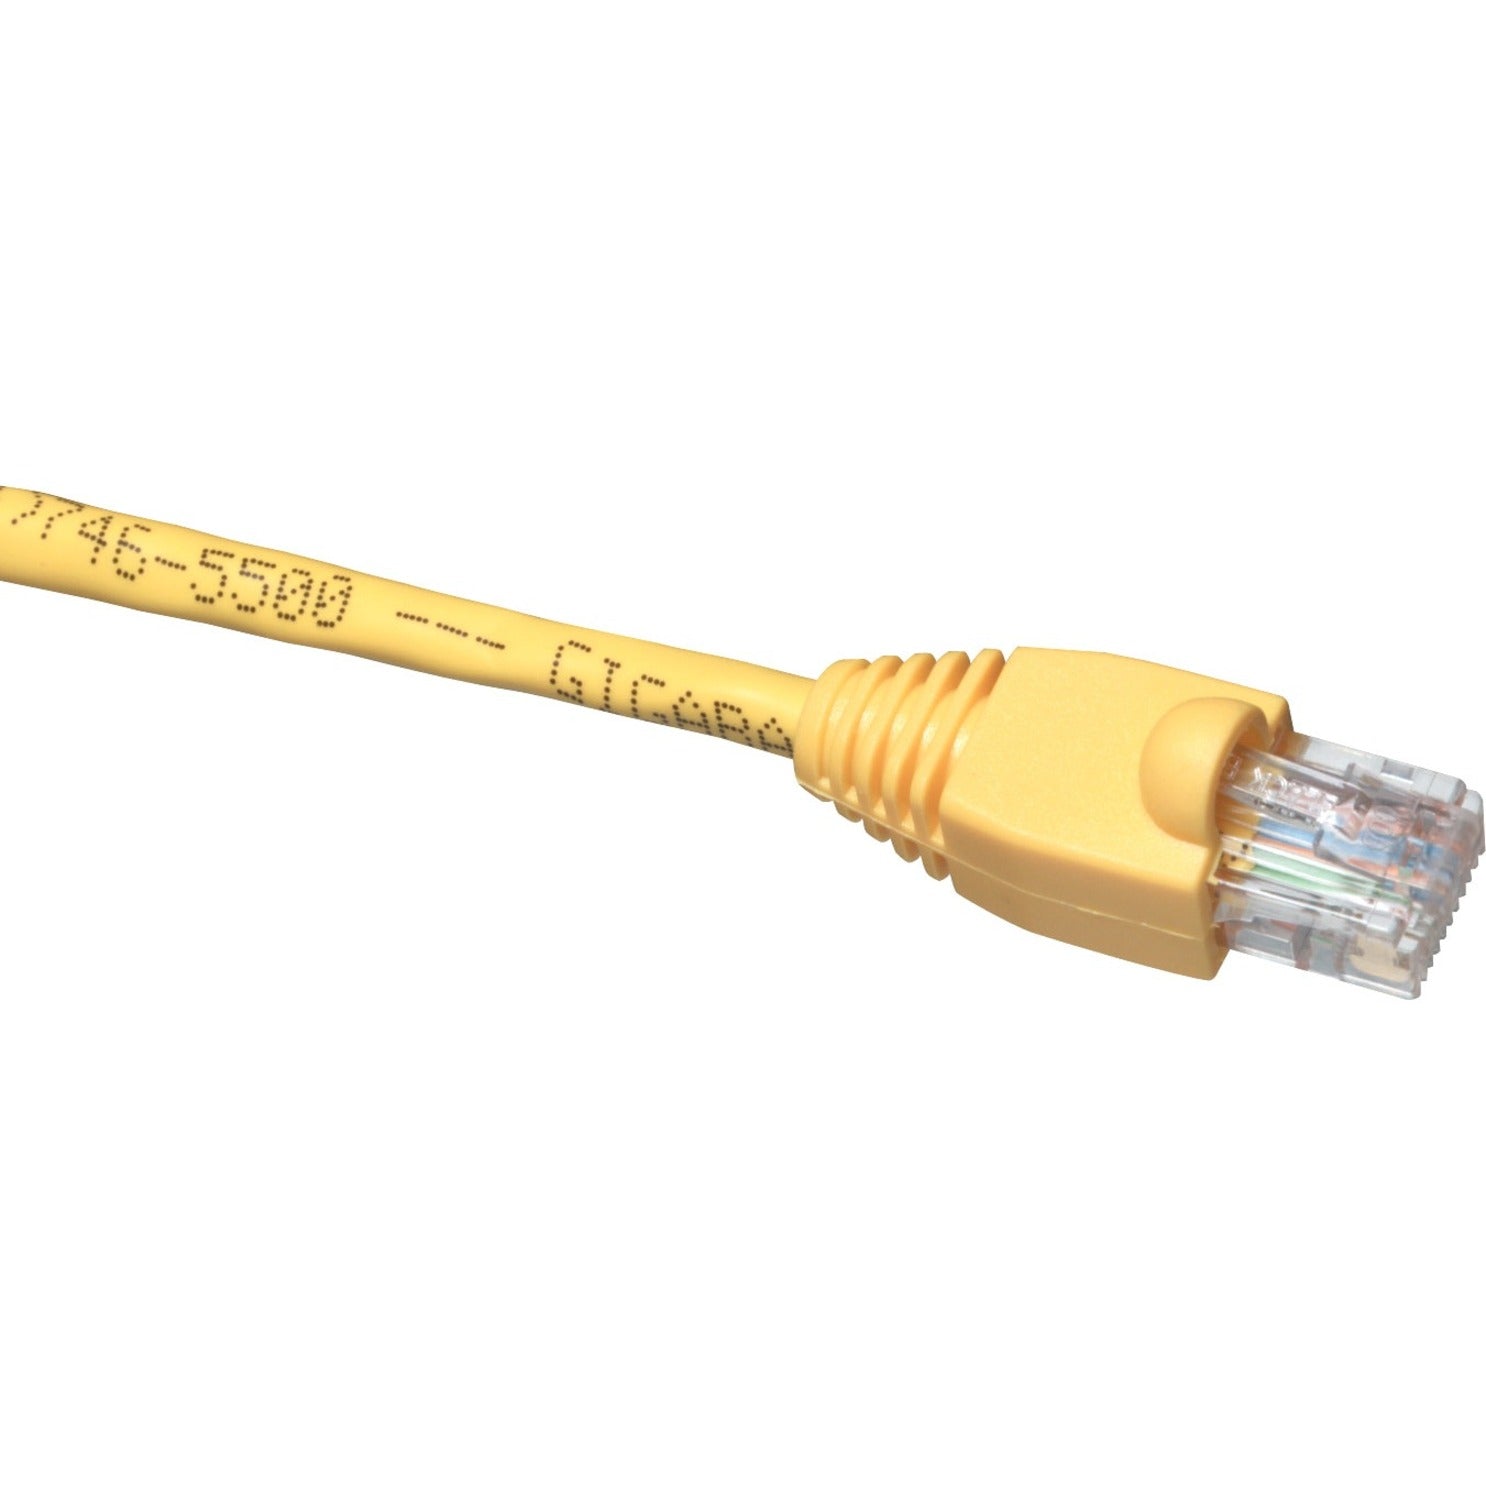 Black Box EVCRB84-0020 GigaBase Cat.5e UTP Patch Network Cable, 20 ft, Snagless Boot, Copper Conductor, Gold Plated Connectors, Yellow Jacket